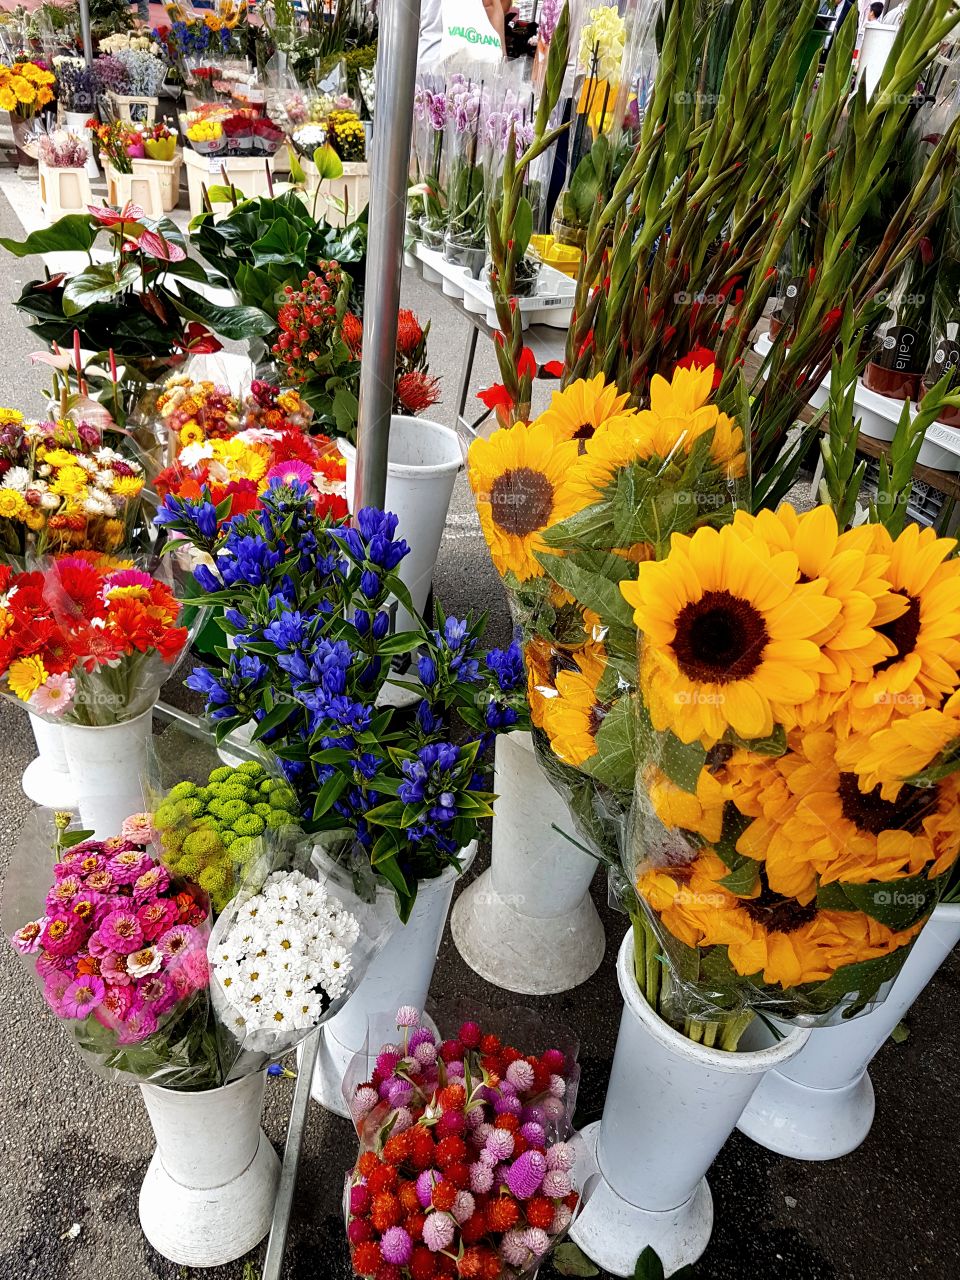 Multicolored flowers for sale at the street market in Italy